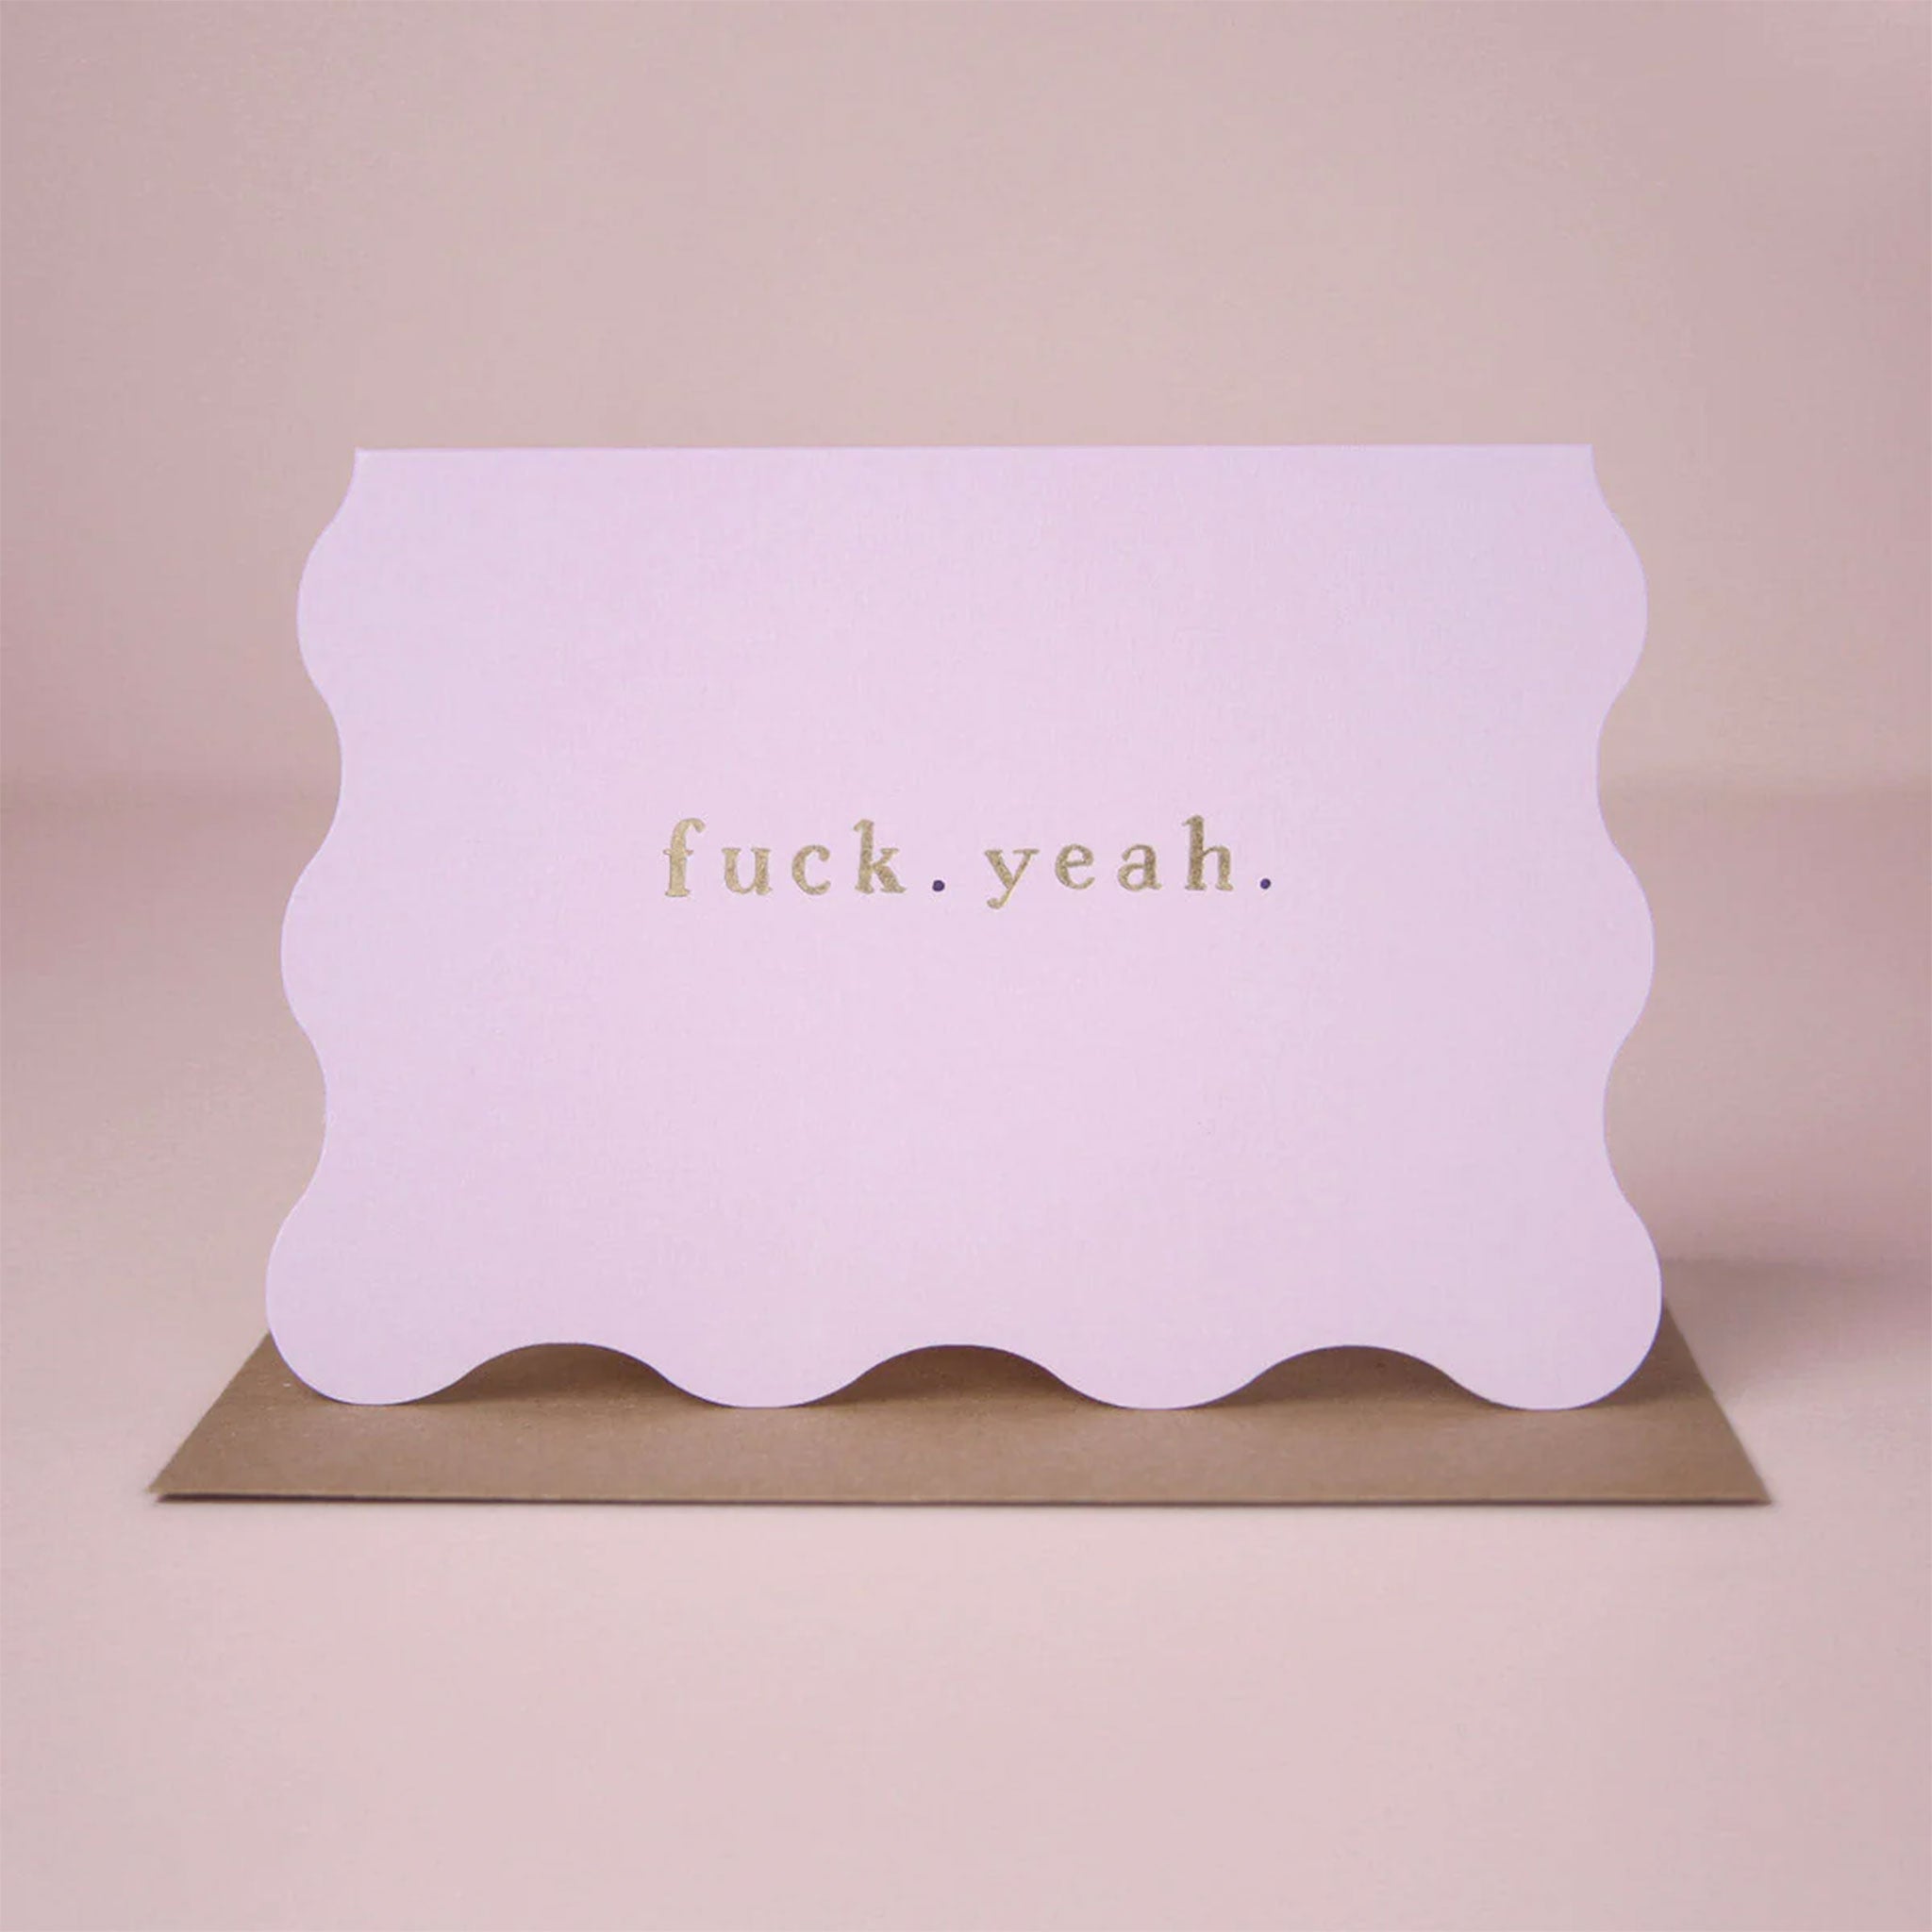 On a pink background is a wavy card with gold foiled text that reads, "fuck. yeah.". 